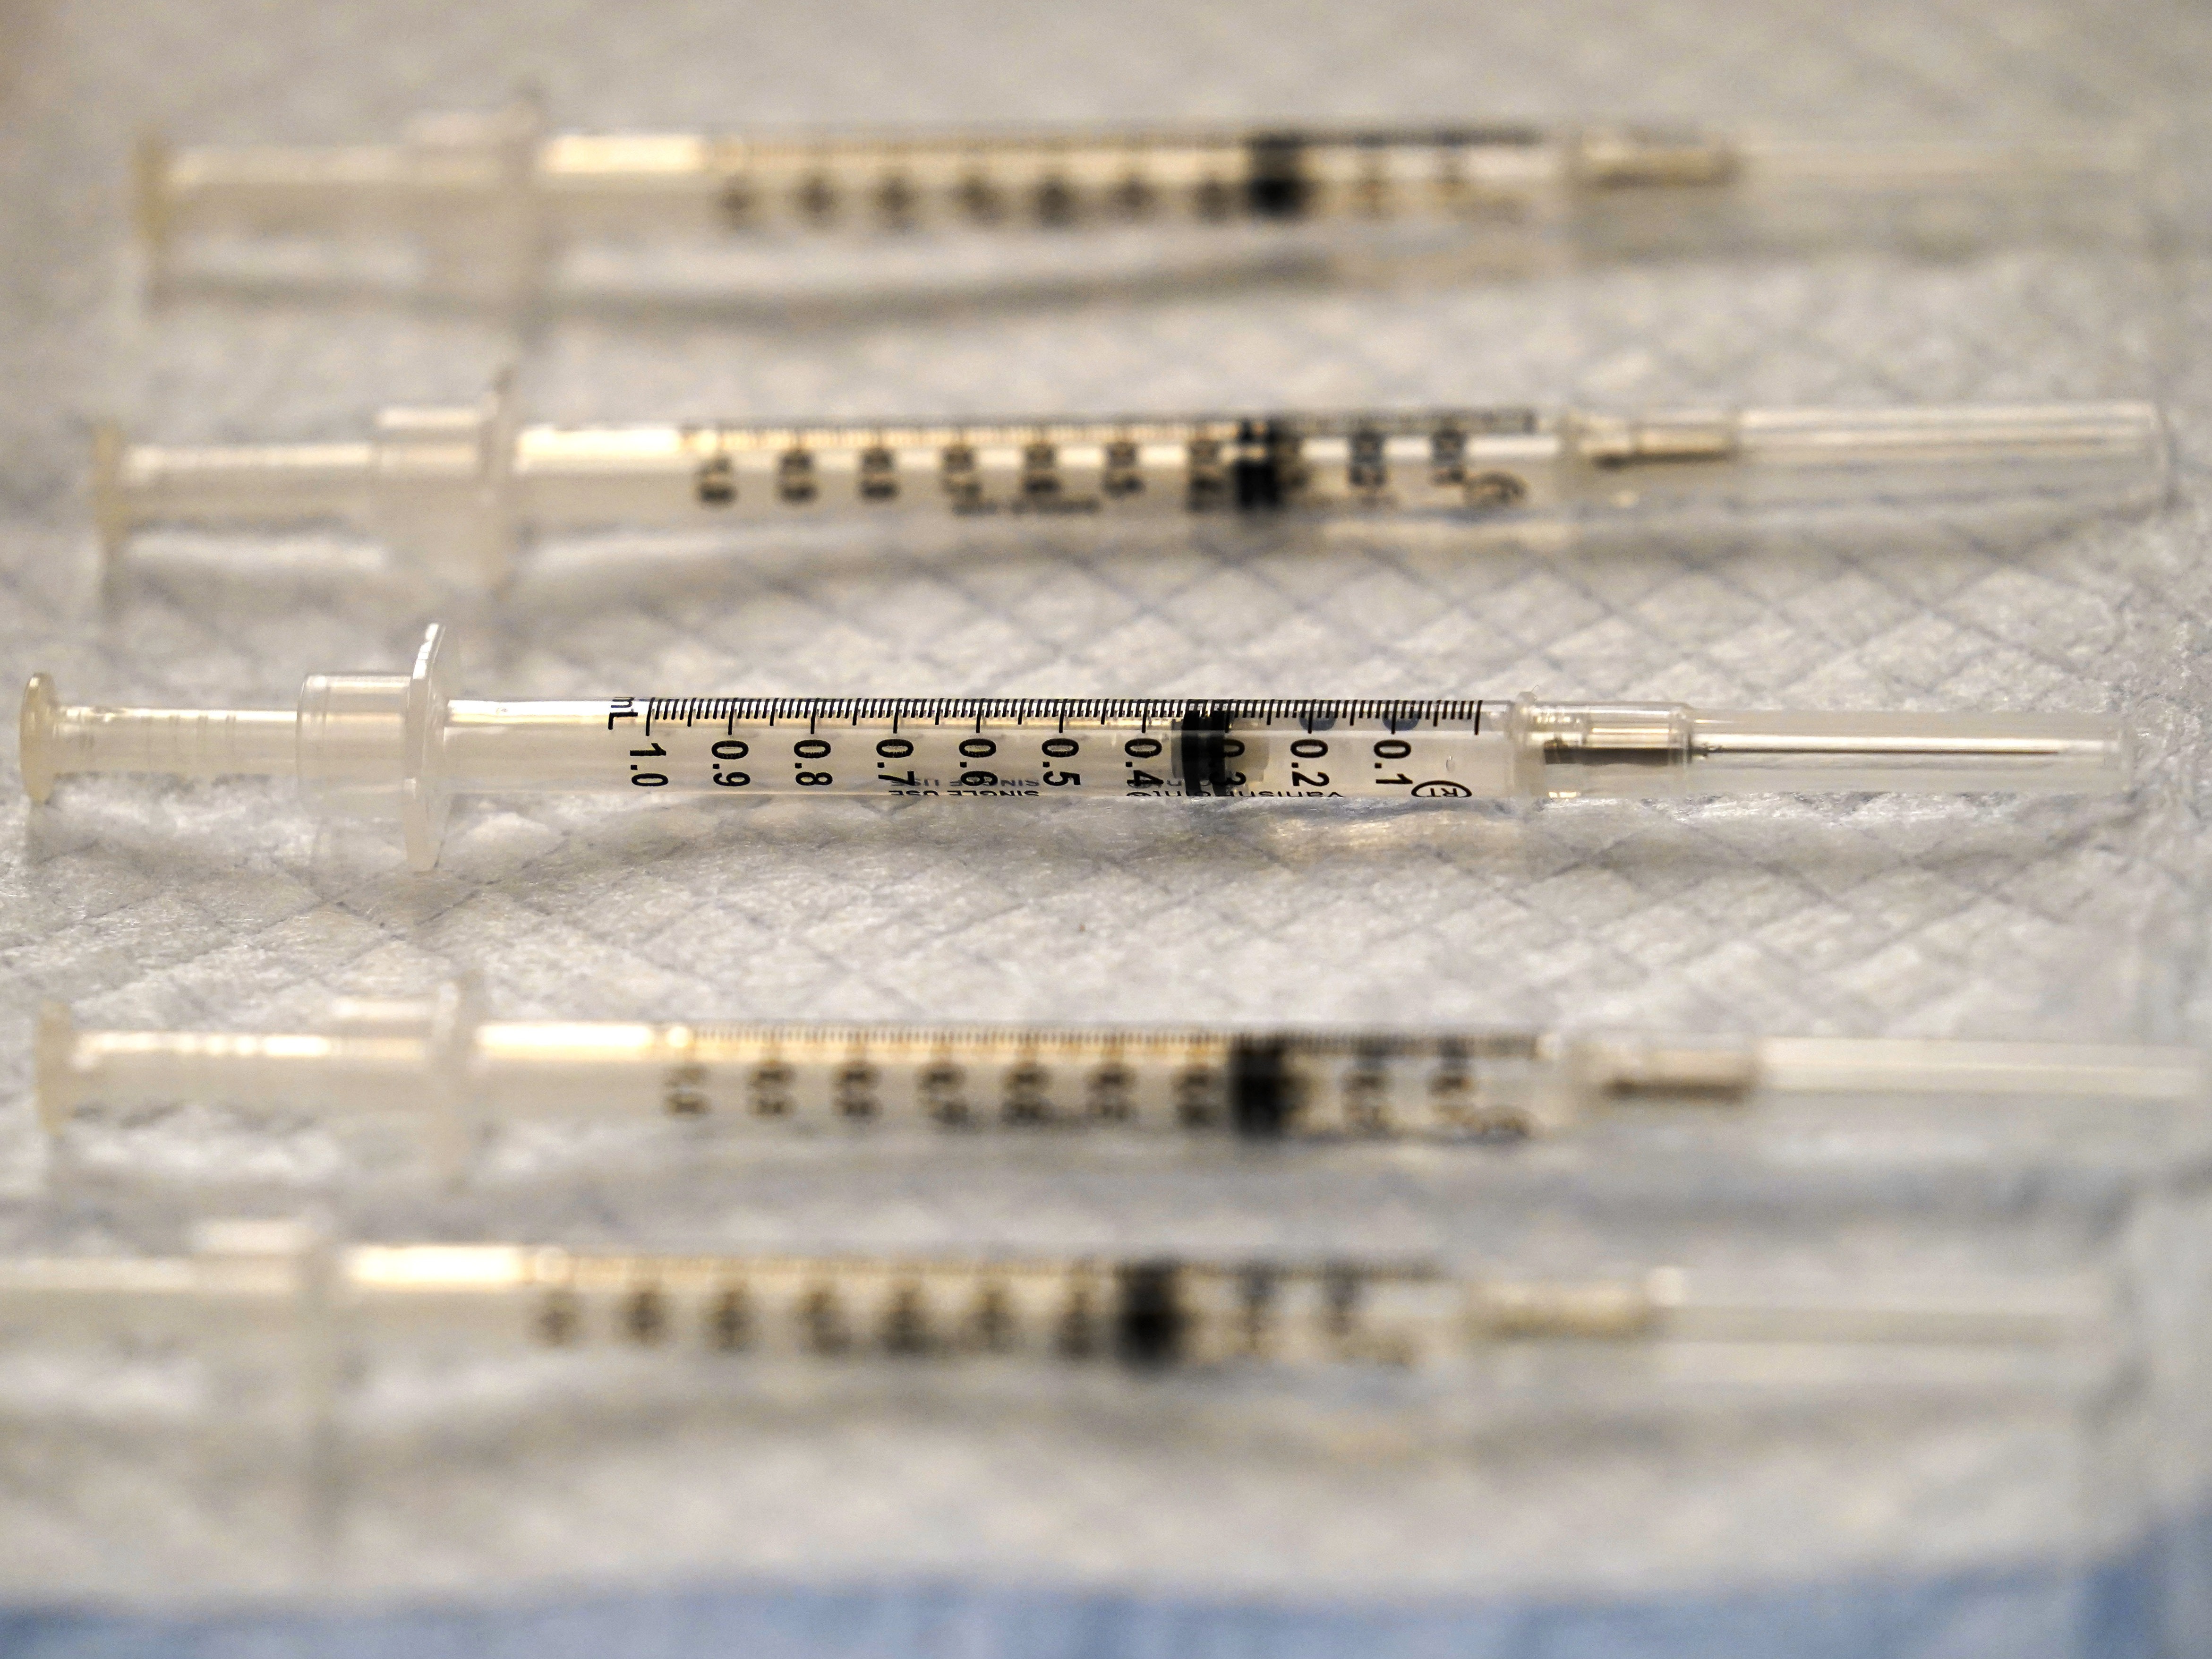 Prepared COVID-19 Pfizer-BioNTech vaccine syringes are seen at Edward Hospital in Naperville, Ill., Thursday, Dec. 17, 2020. Illinois received about 43,000 doses in its first shipment of a COVID-19 vaccine Monday as health officials reported another 103 coronavirus deaths statewide. Most of the shots will be distributed to local health care centers for health care workers, according to Illinois Gov. J.B. Pritzker's office. CREDIT: Nam Y. Huh/AP